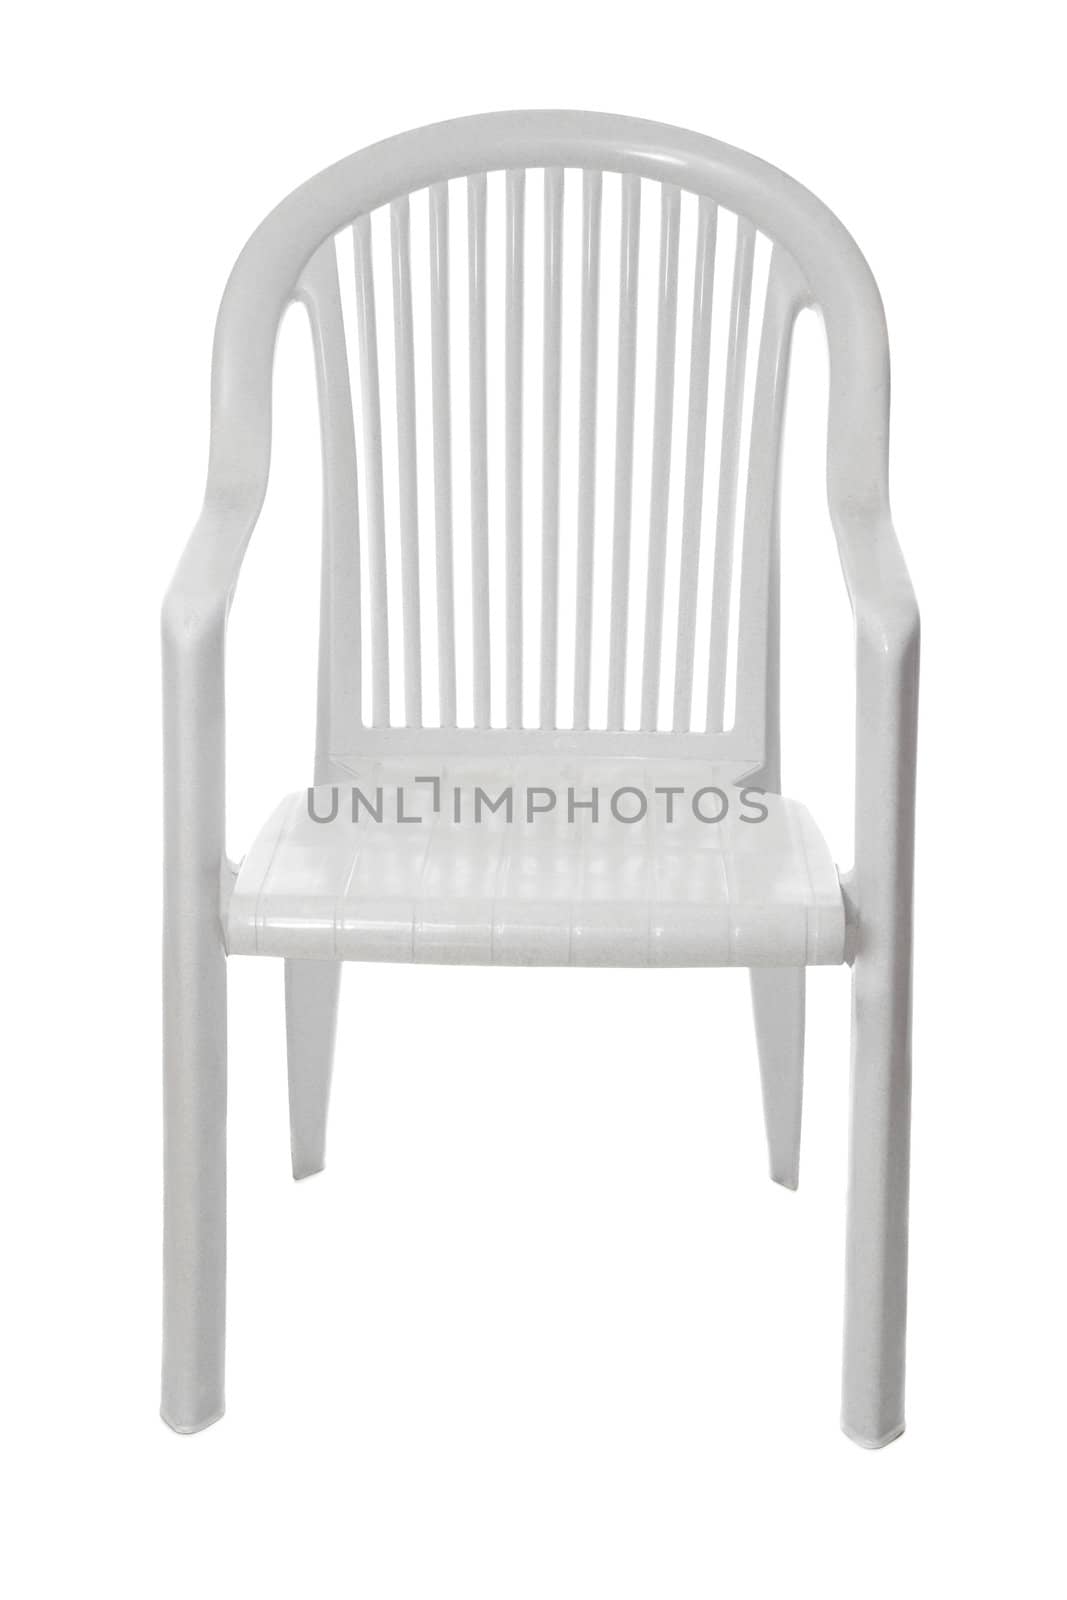 white patio chair isolated on white